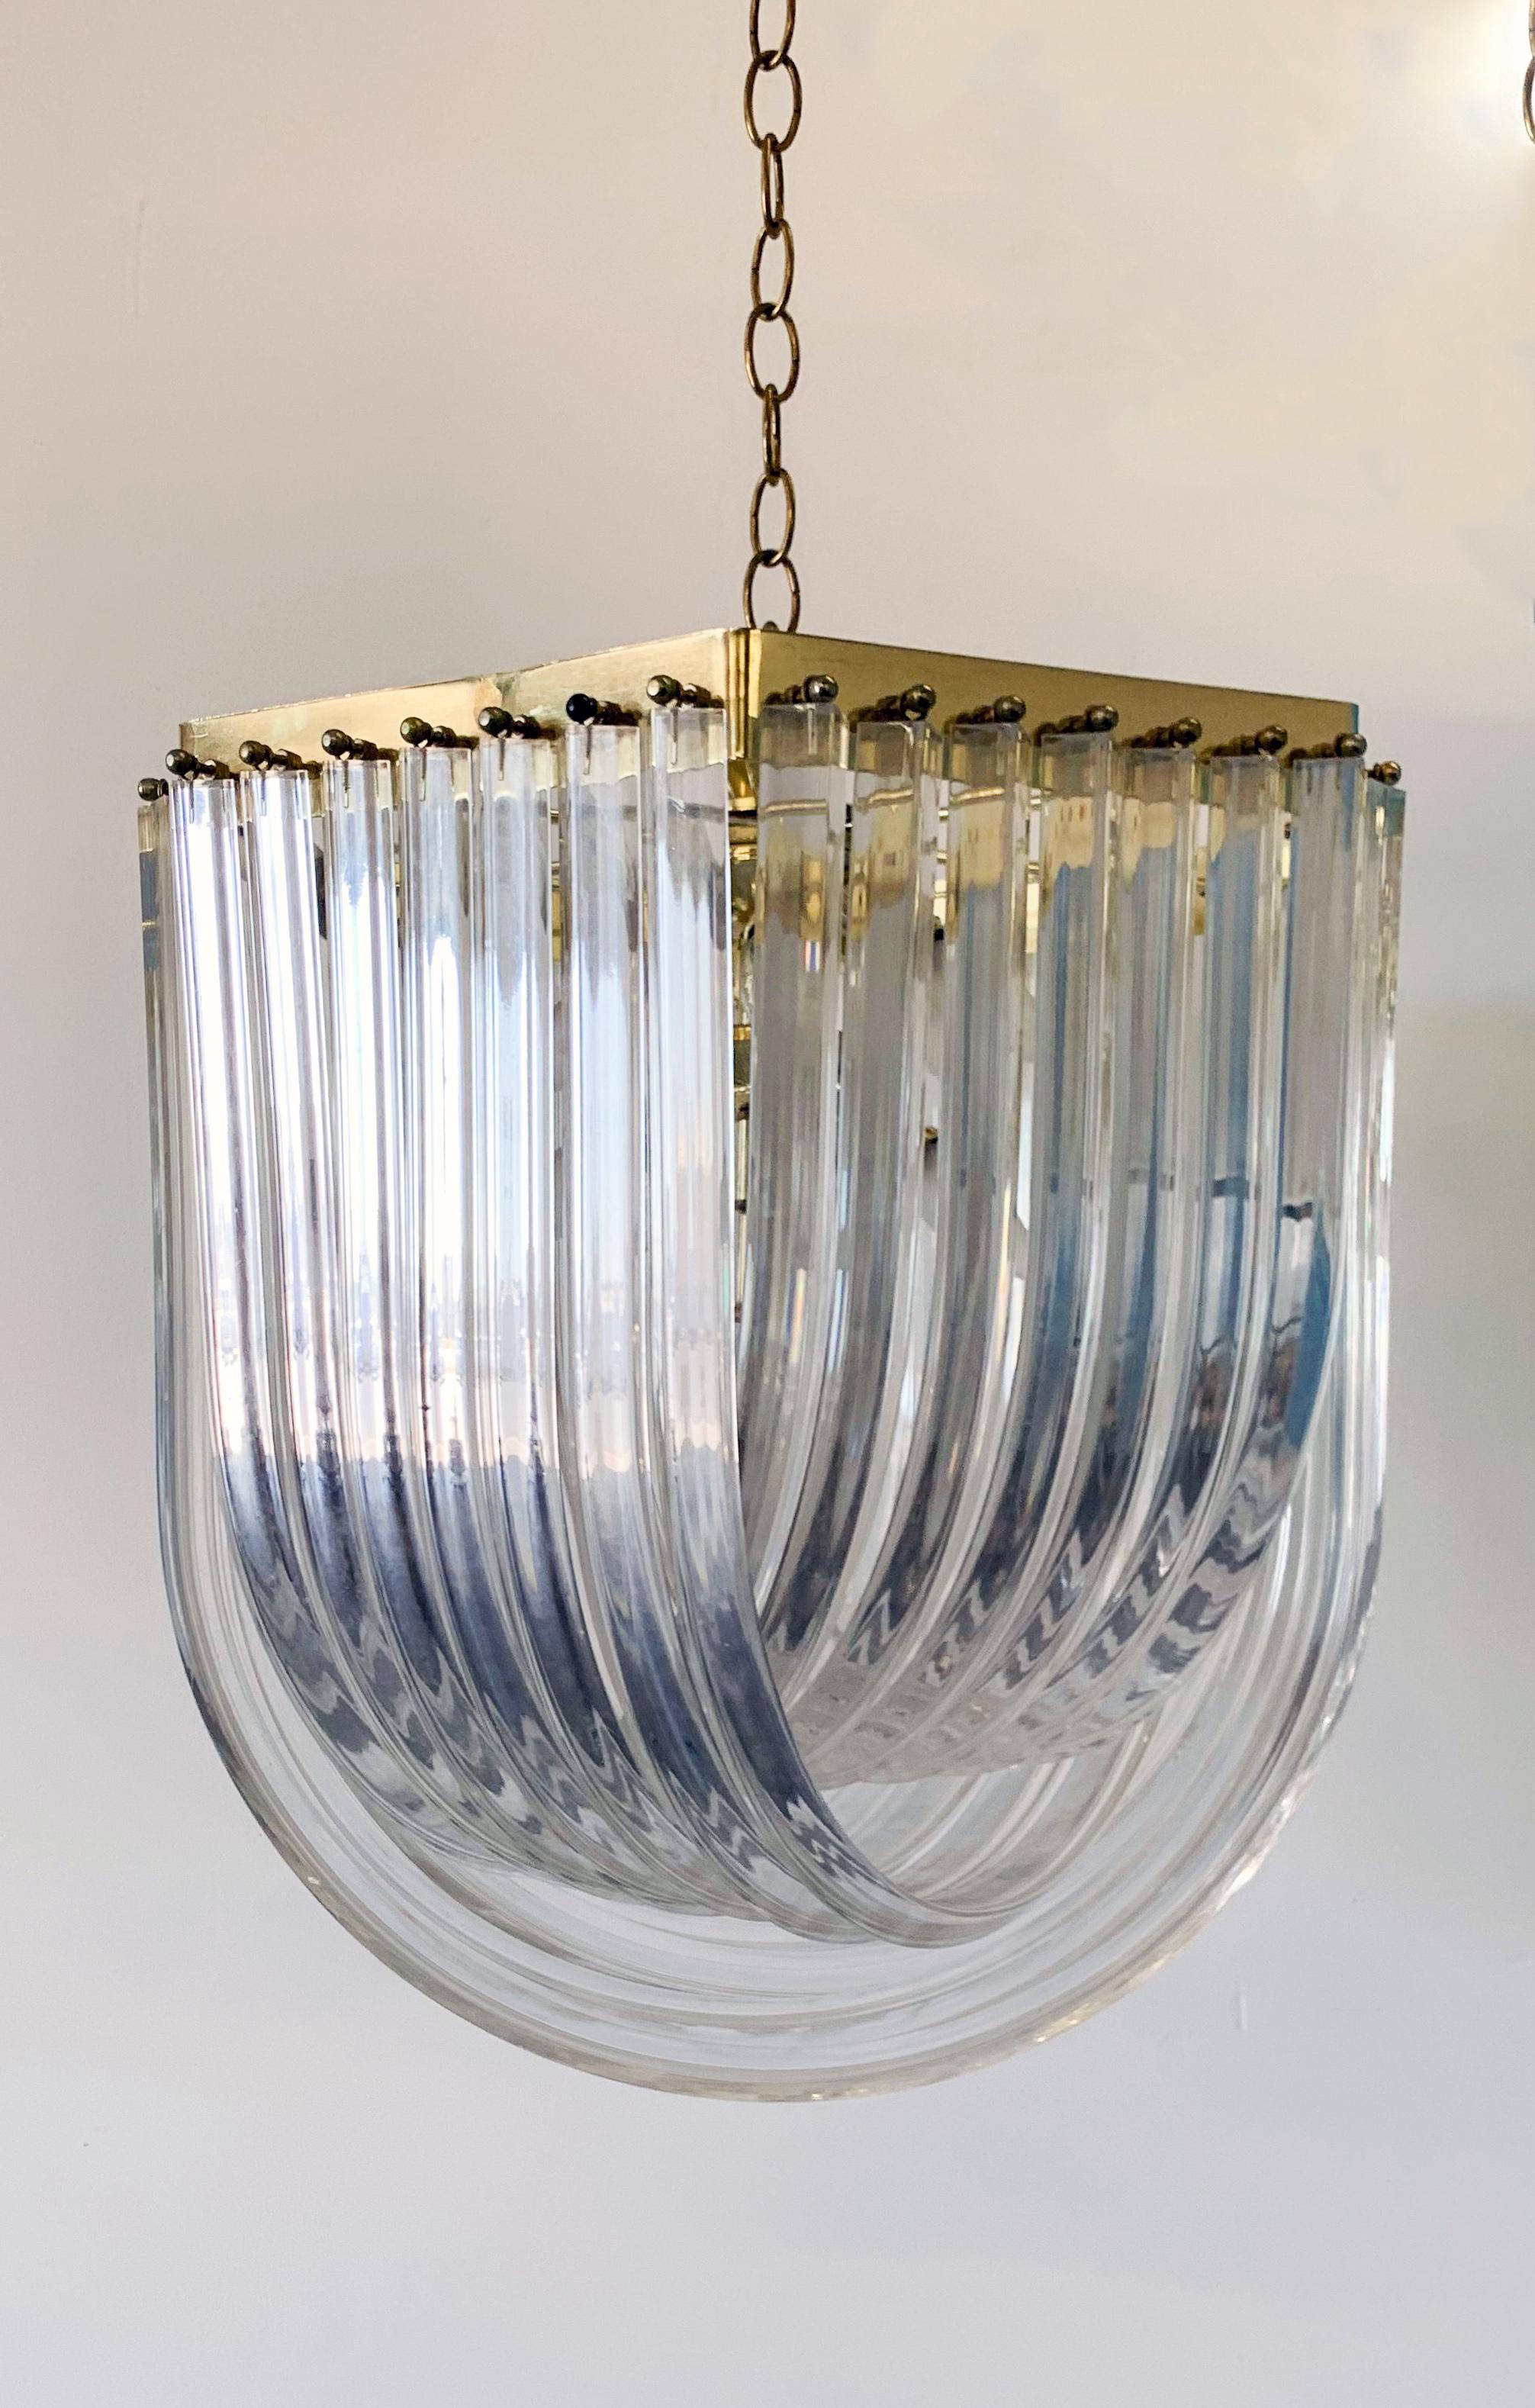 This chandelier is stunning. It features Lucite / acrylic ribbons on a brass frame with brass chain link drop cord. 

This gorgeous chandelier is in the style of Venini and would look incredible in any type of Mid-Century Modern, or Hollywood